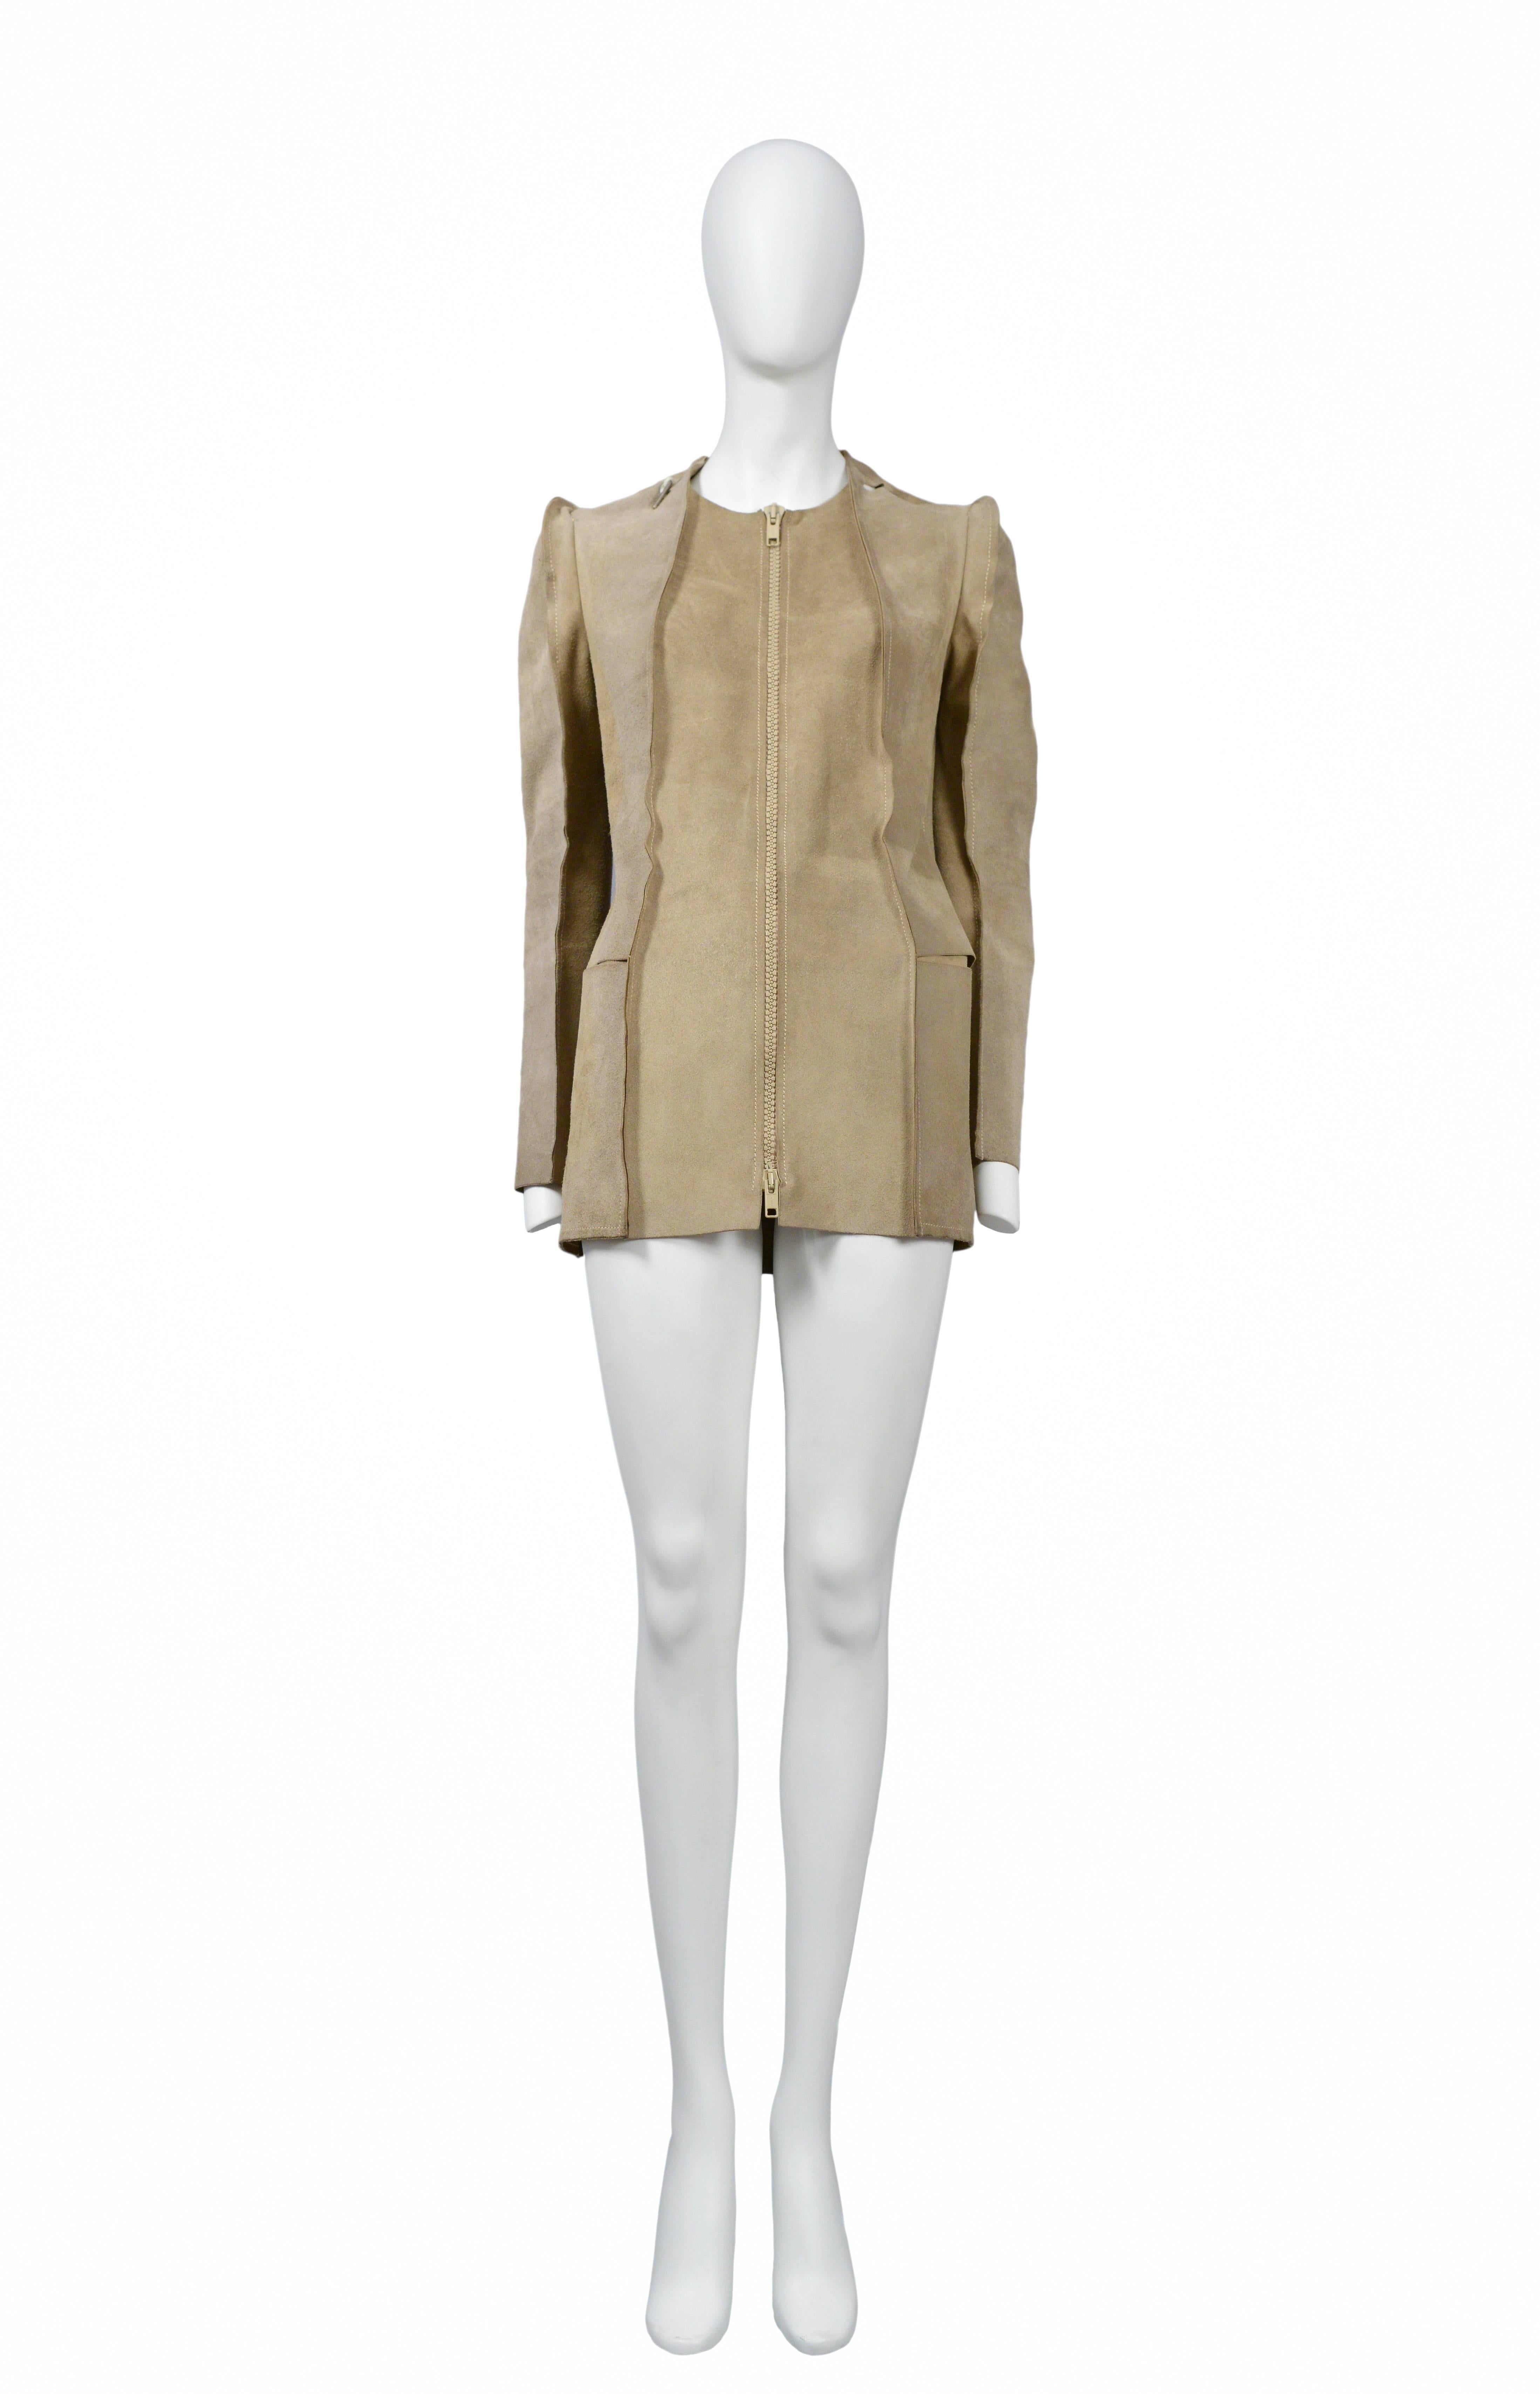 Vintage Maison Martin Margiela tan suede coat fashioned after a flat coat pattern. Coat features inside out seams, whole punches at shoulder and pattern hook detail. From the 1998 Collection.
Please inquire for additional images.